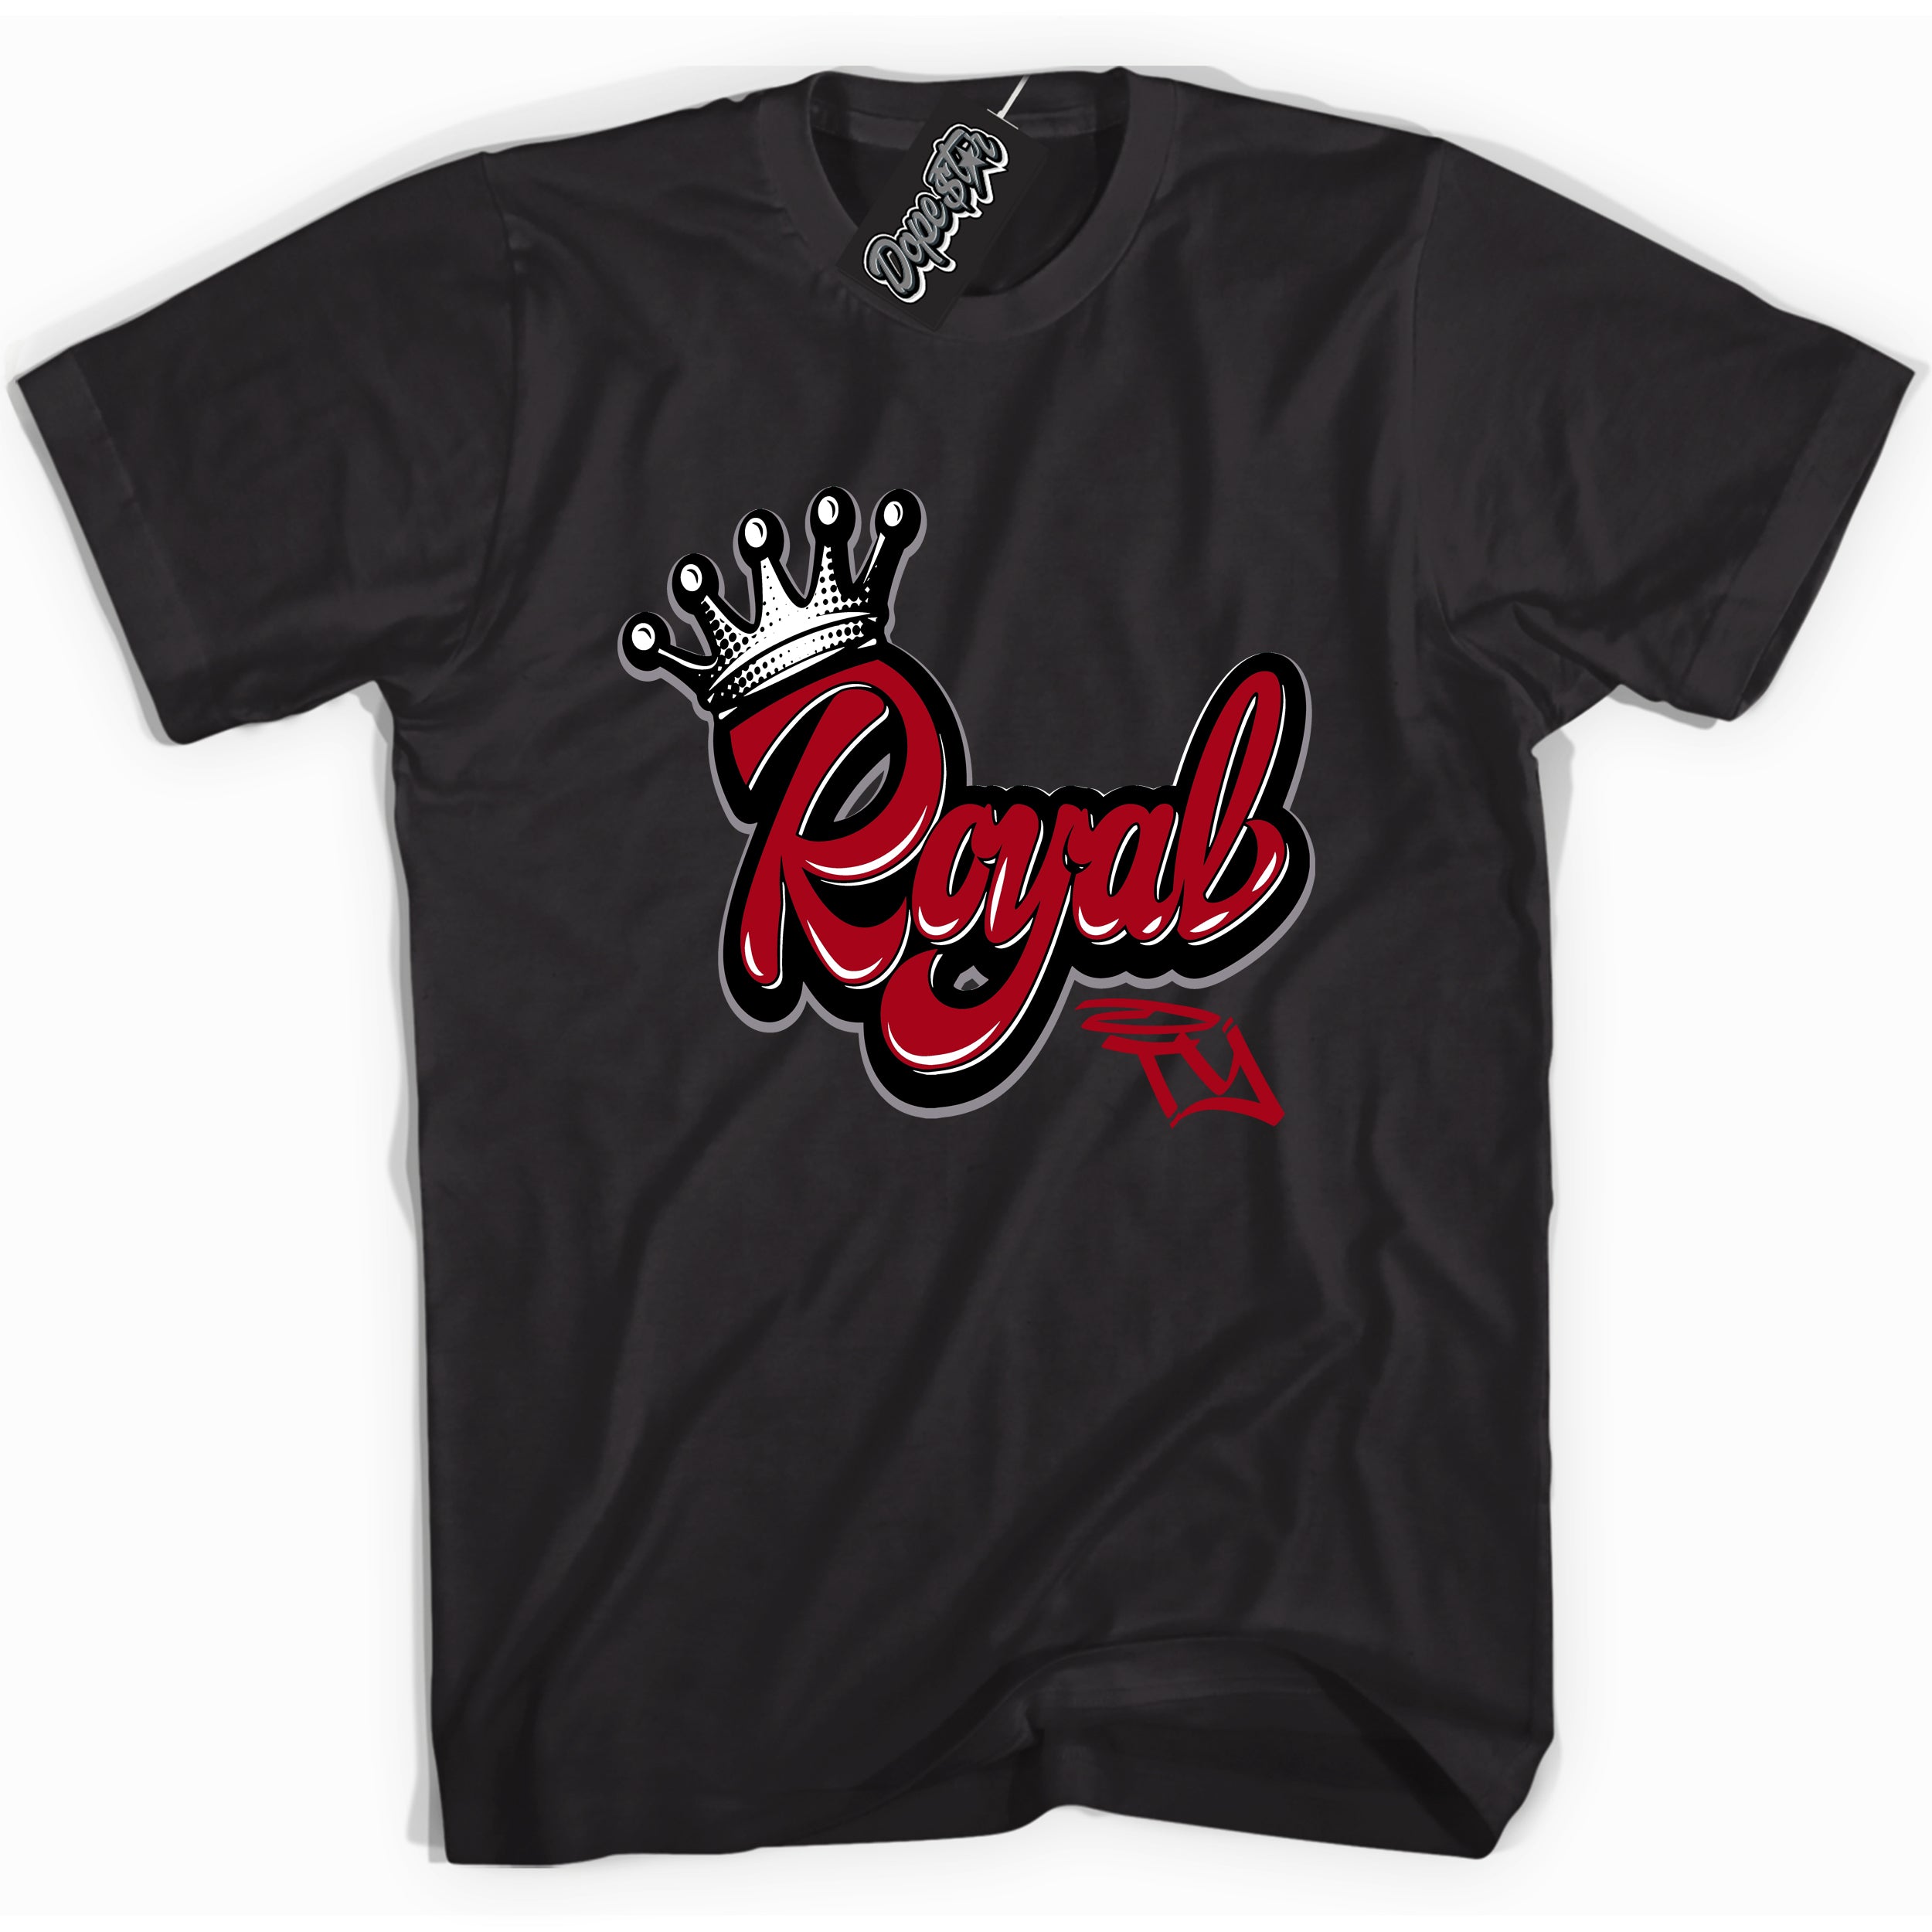 Cool Black Shirt with “ Royalty” design that perfectly matches Bred Reimagined 4s Jordans.